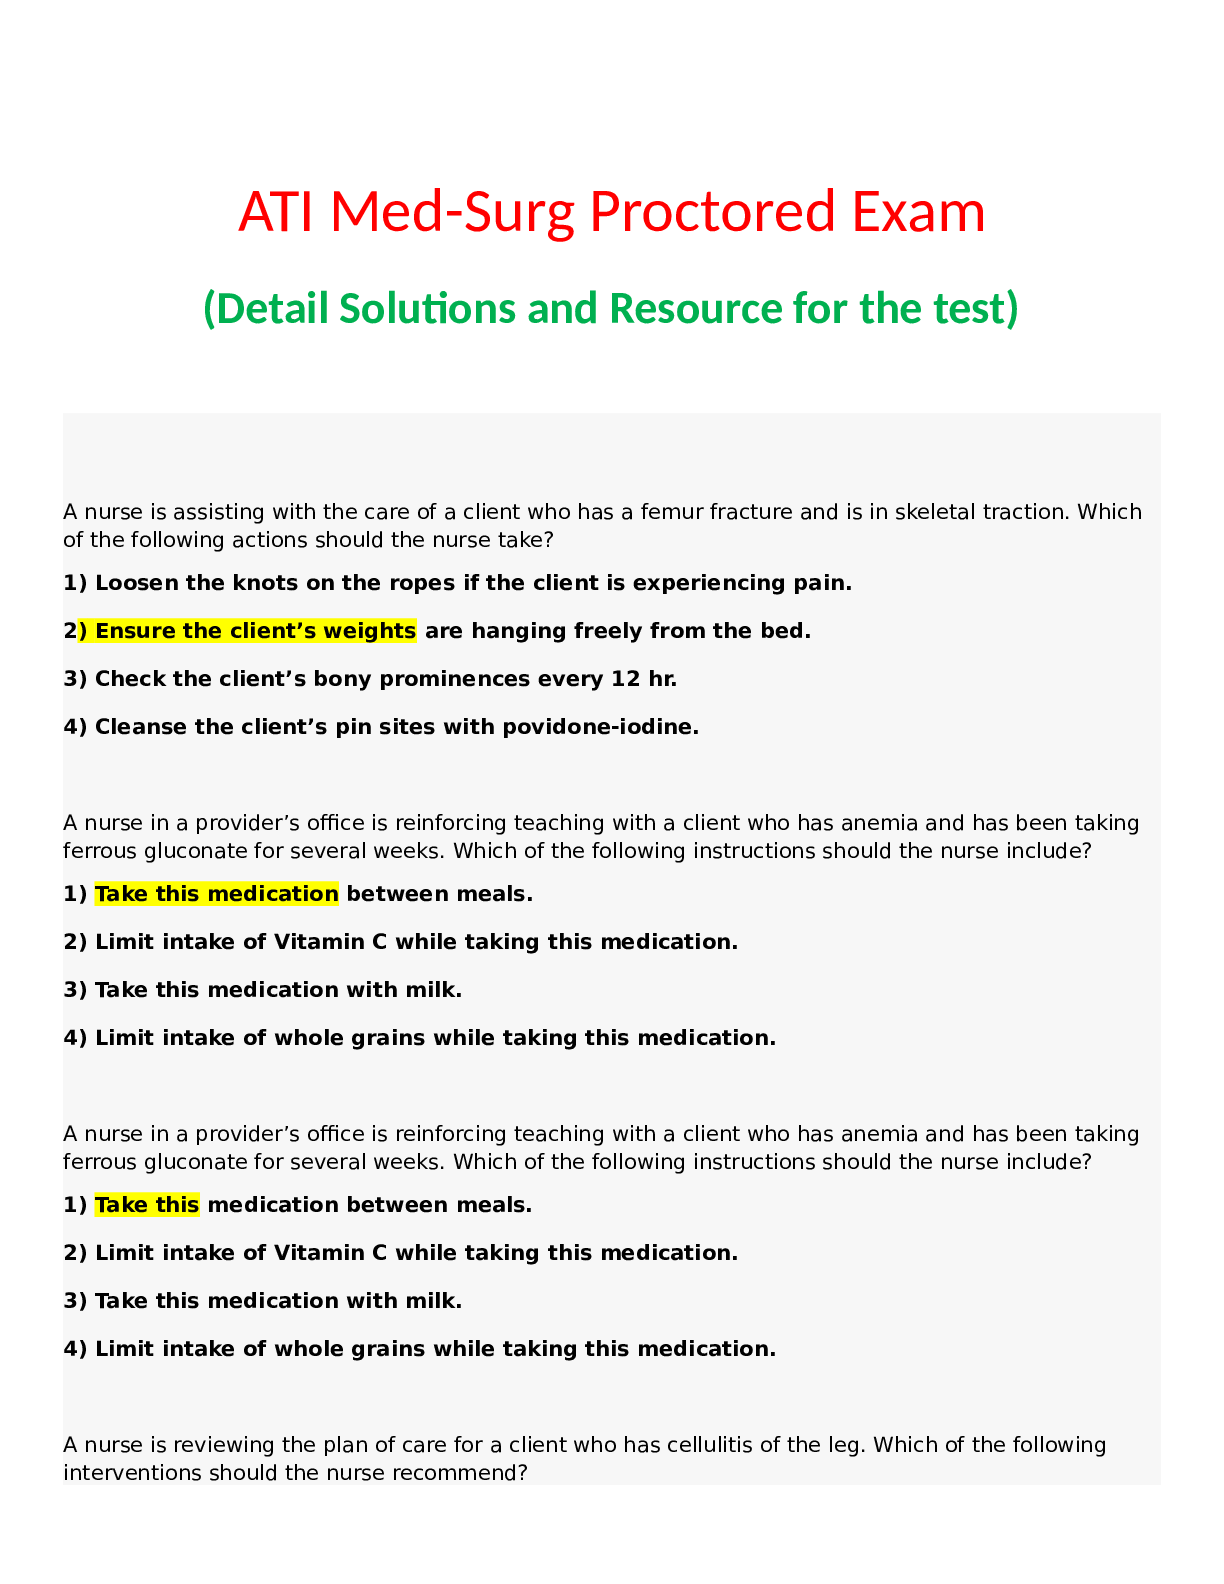 ATI Med-Surg Proctored Exam 2021 And Solution